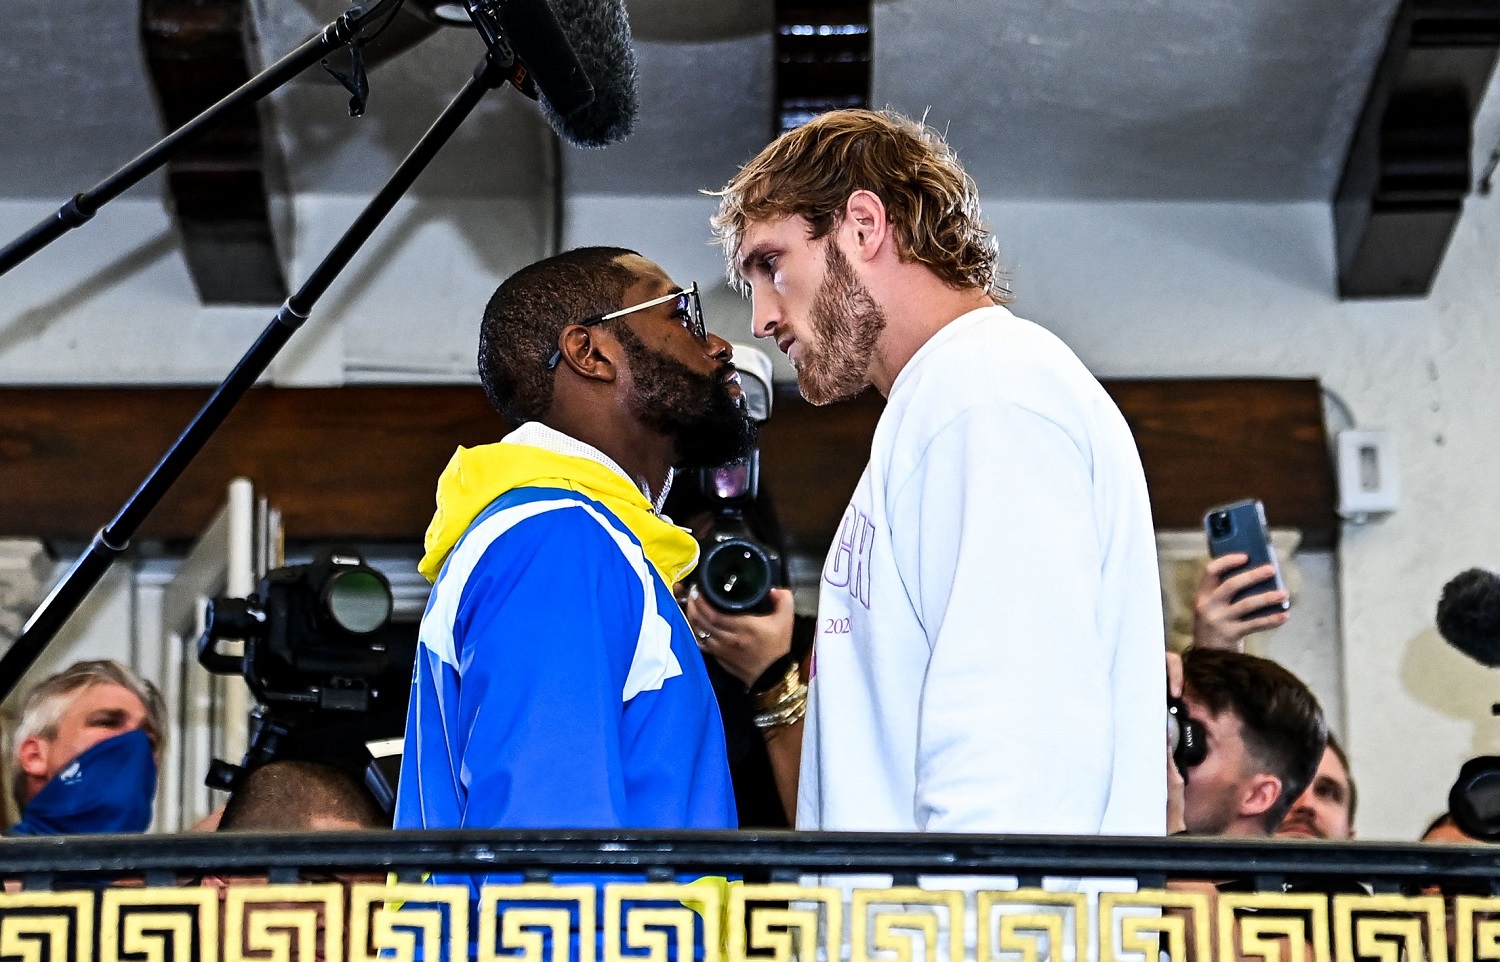 Former world boxing champion Floyd Mayweather and YouTube personality Logan Paul face off during the media availability ahead of their June 6 exhibition match.